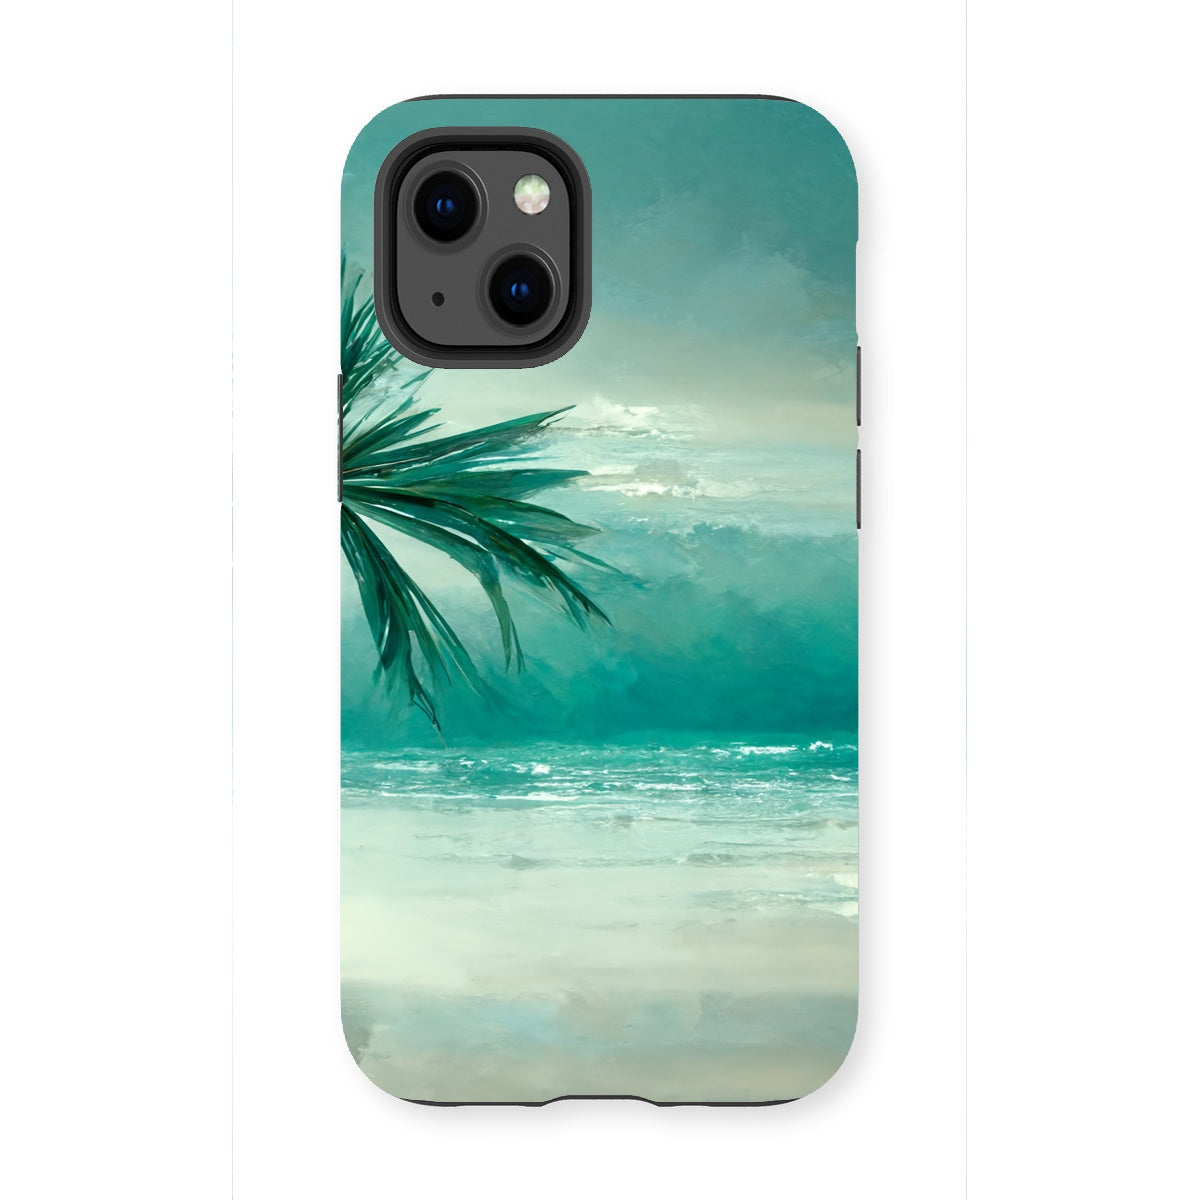 Lonesome Palm Tough Phone Case